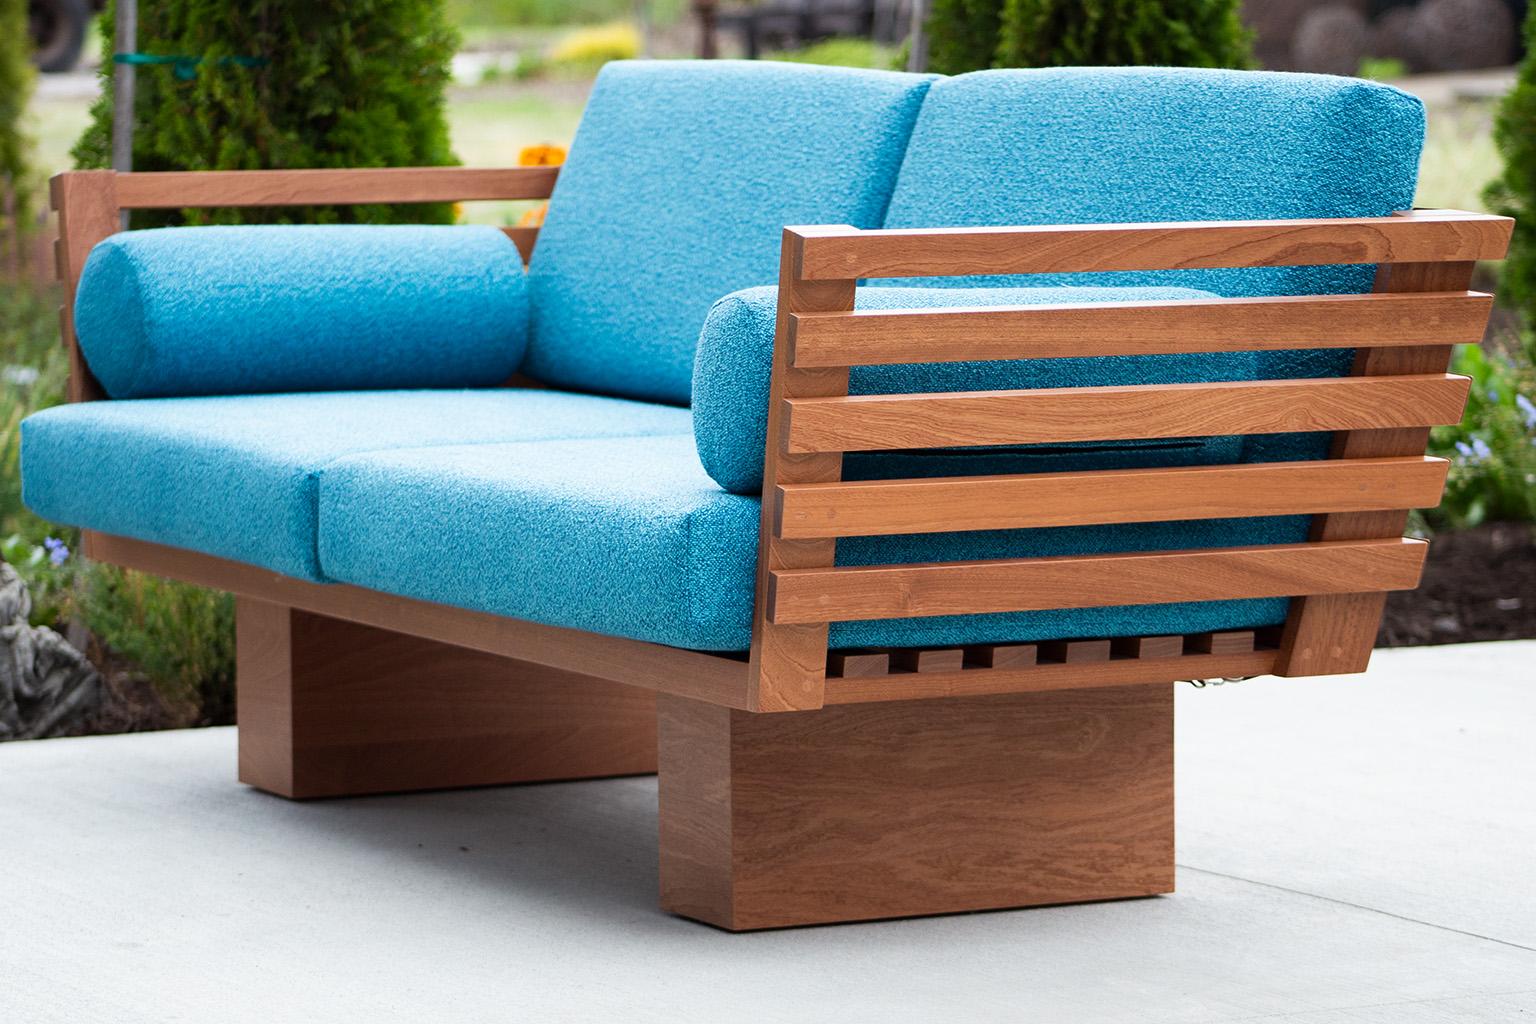 This Modern Patio Furniture - Suelo Slatted Loveseat is beautifully constructed in Ohio, USA. This silhouette is simple, modern, and sleek with comfortable back and seat cushions. The wood frame is suitable for outdoor conditions and finished with a